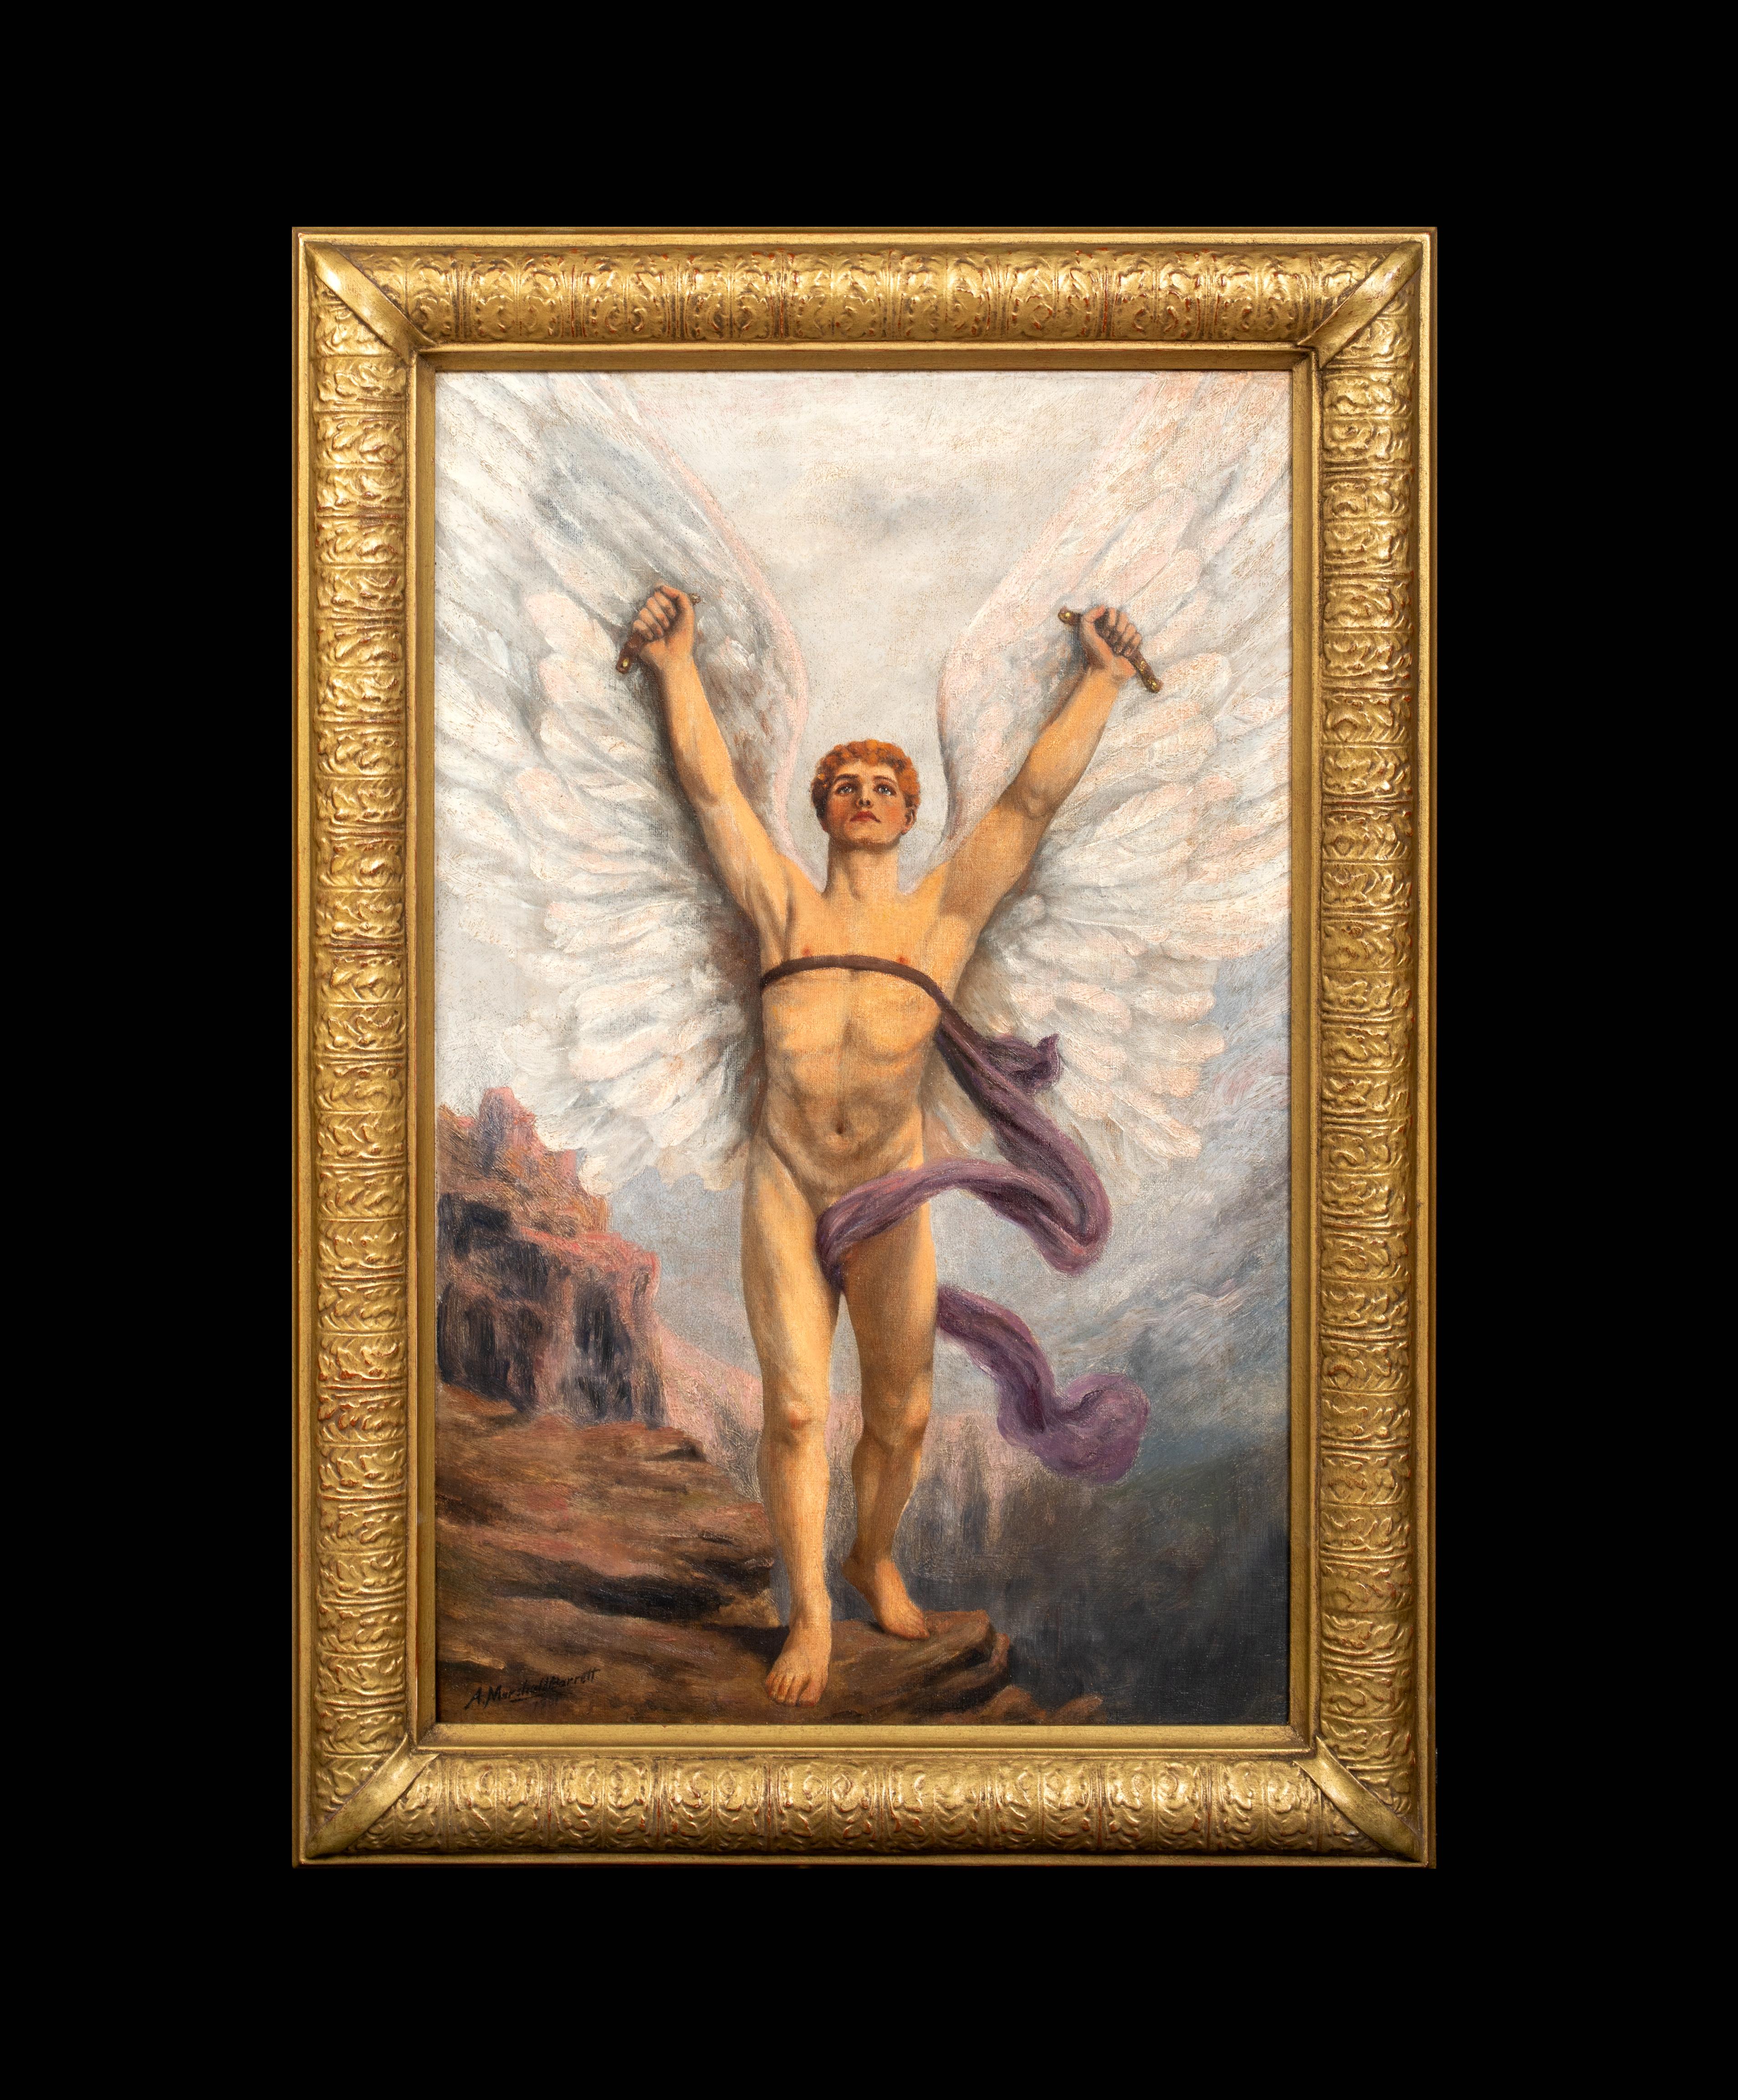 Icarus, 19th Century follower of William Blake (1757-1827) - Painting by Unknown